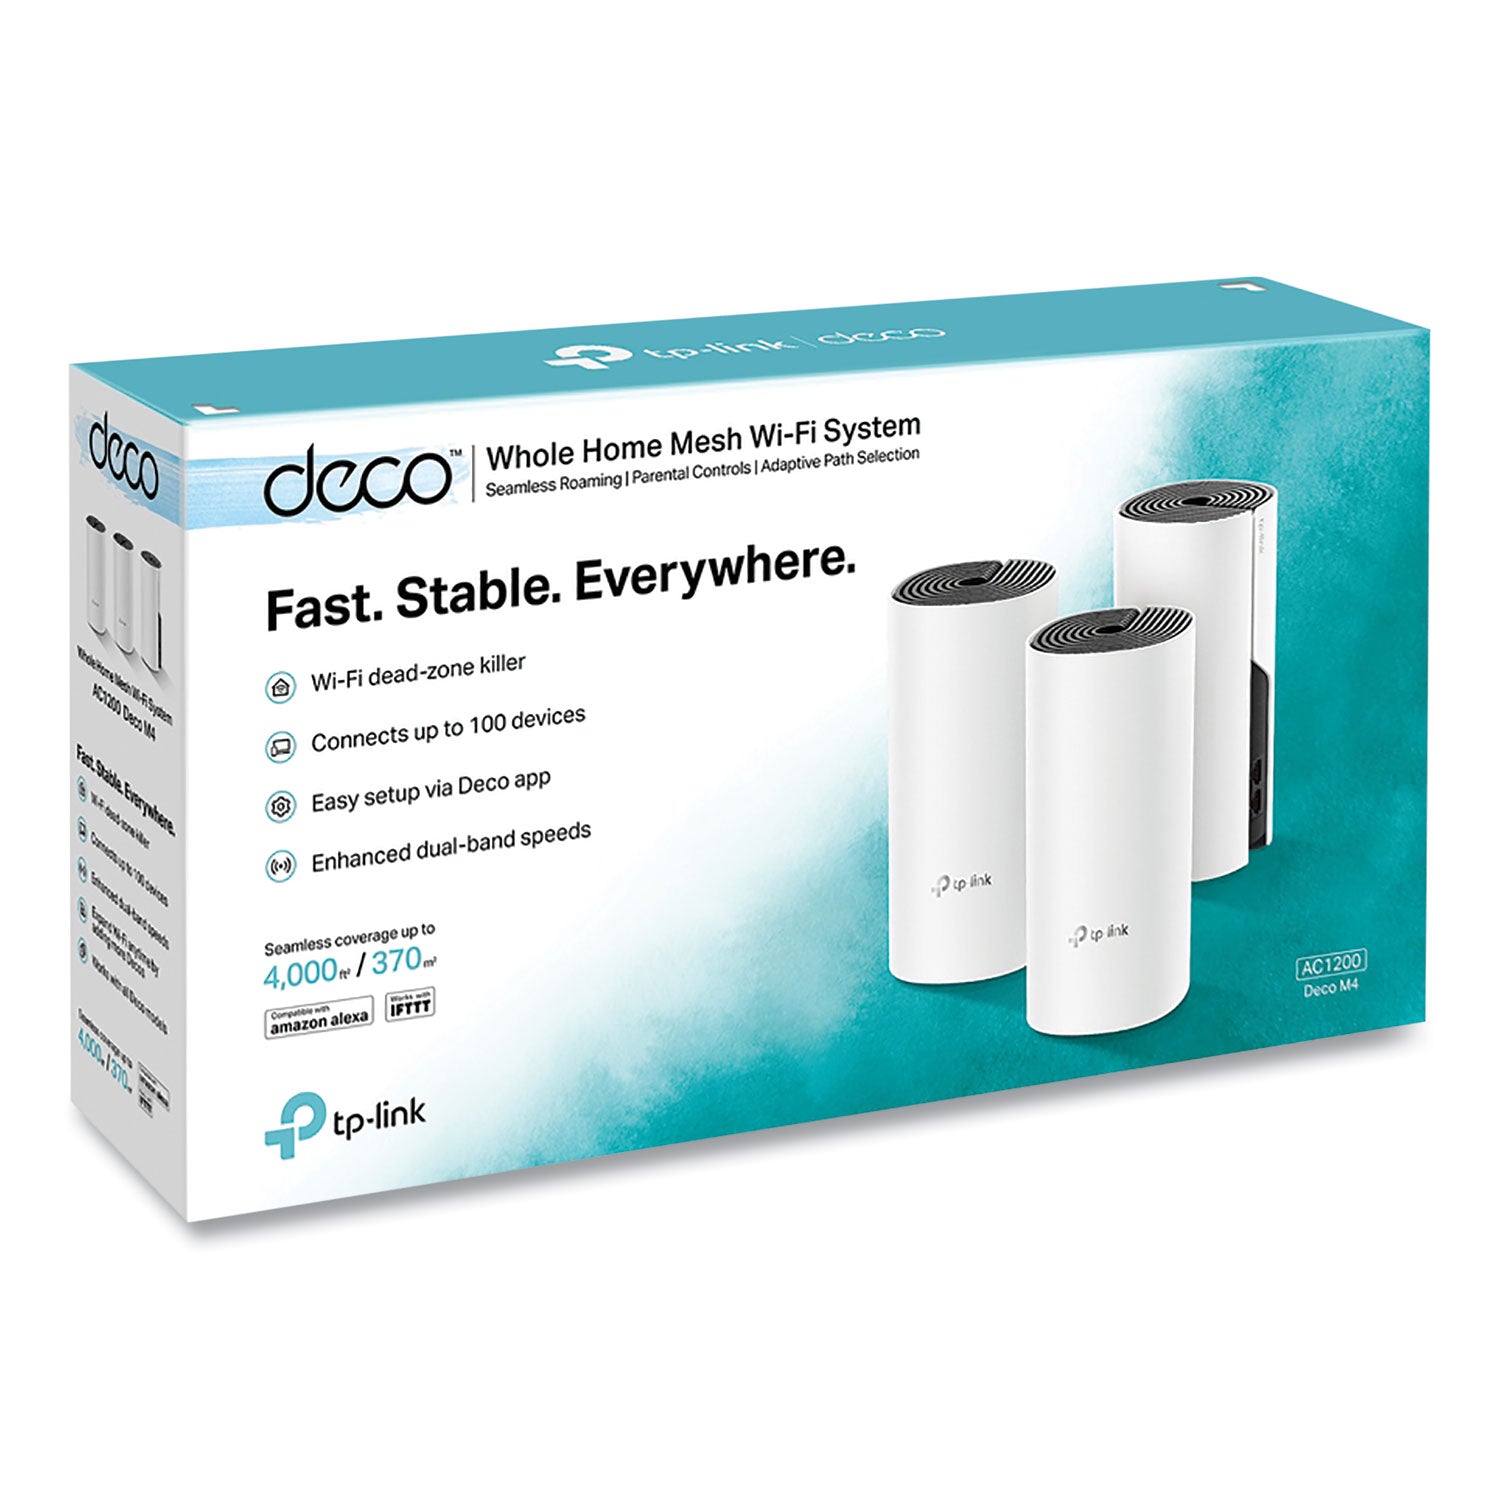 deco-m4-ac1200-whole-home-mesh-wi-fi-system-2-ports-dual-band-24-ghz-5-ghz_tpldecom43pack - 2